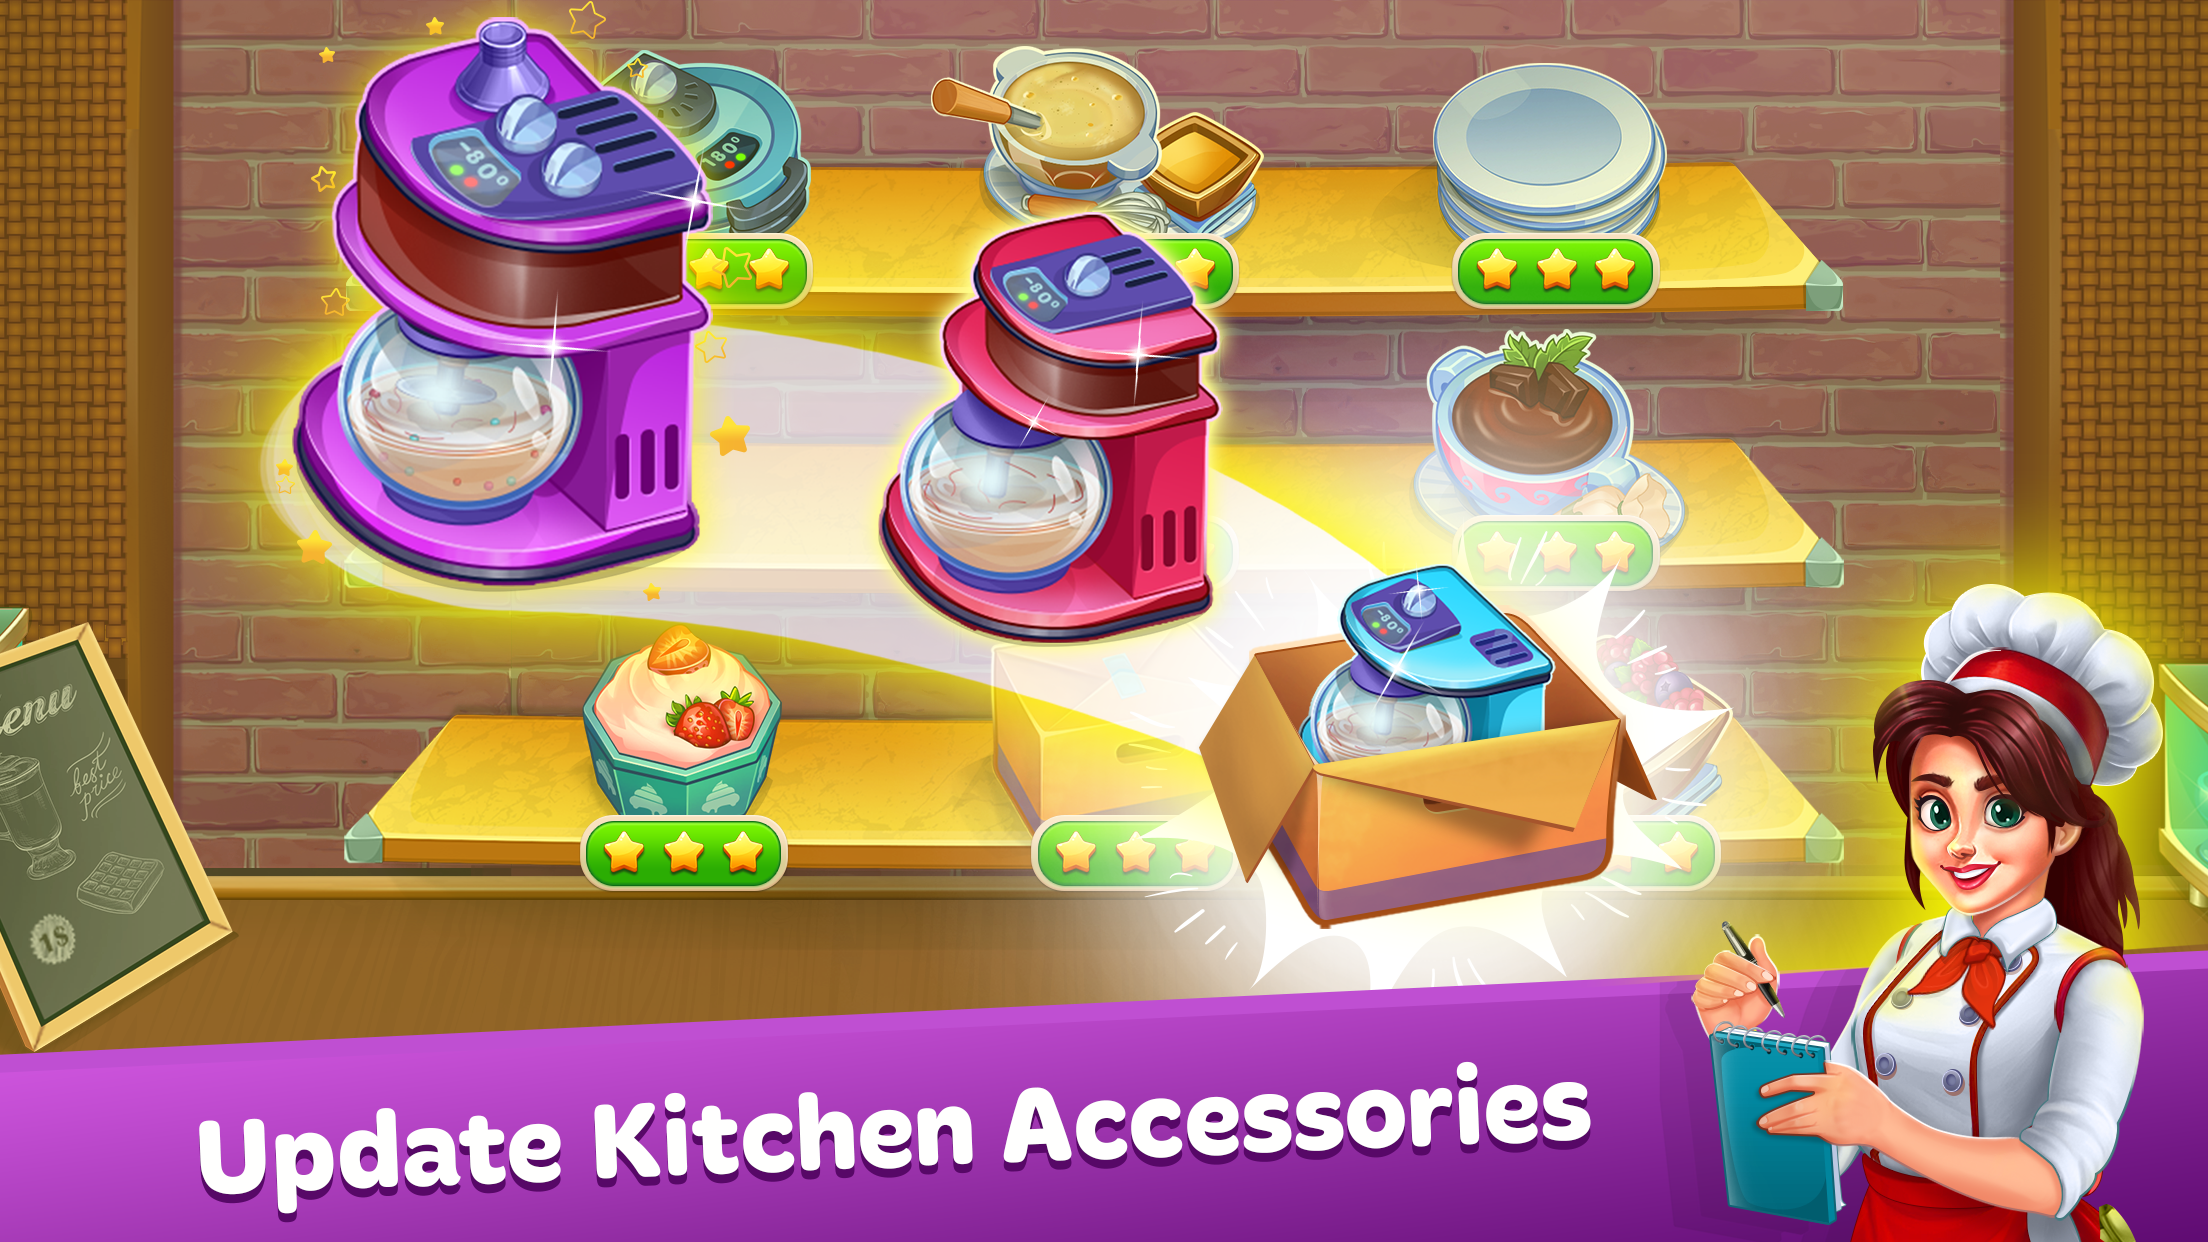 Download Cooking King: Master Chef Game On Pc (Emulator) - Ldplayer